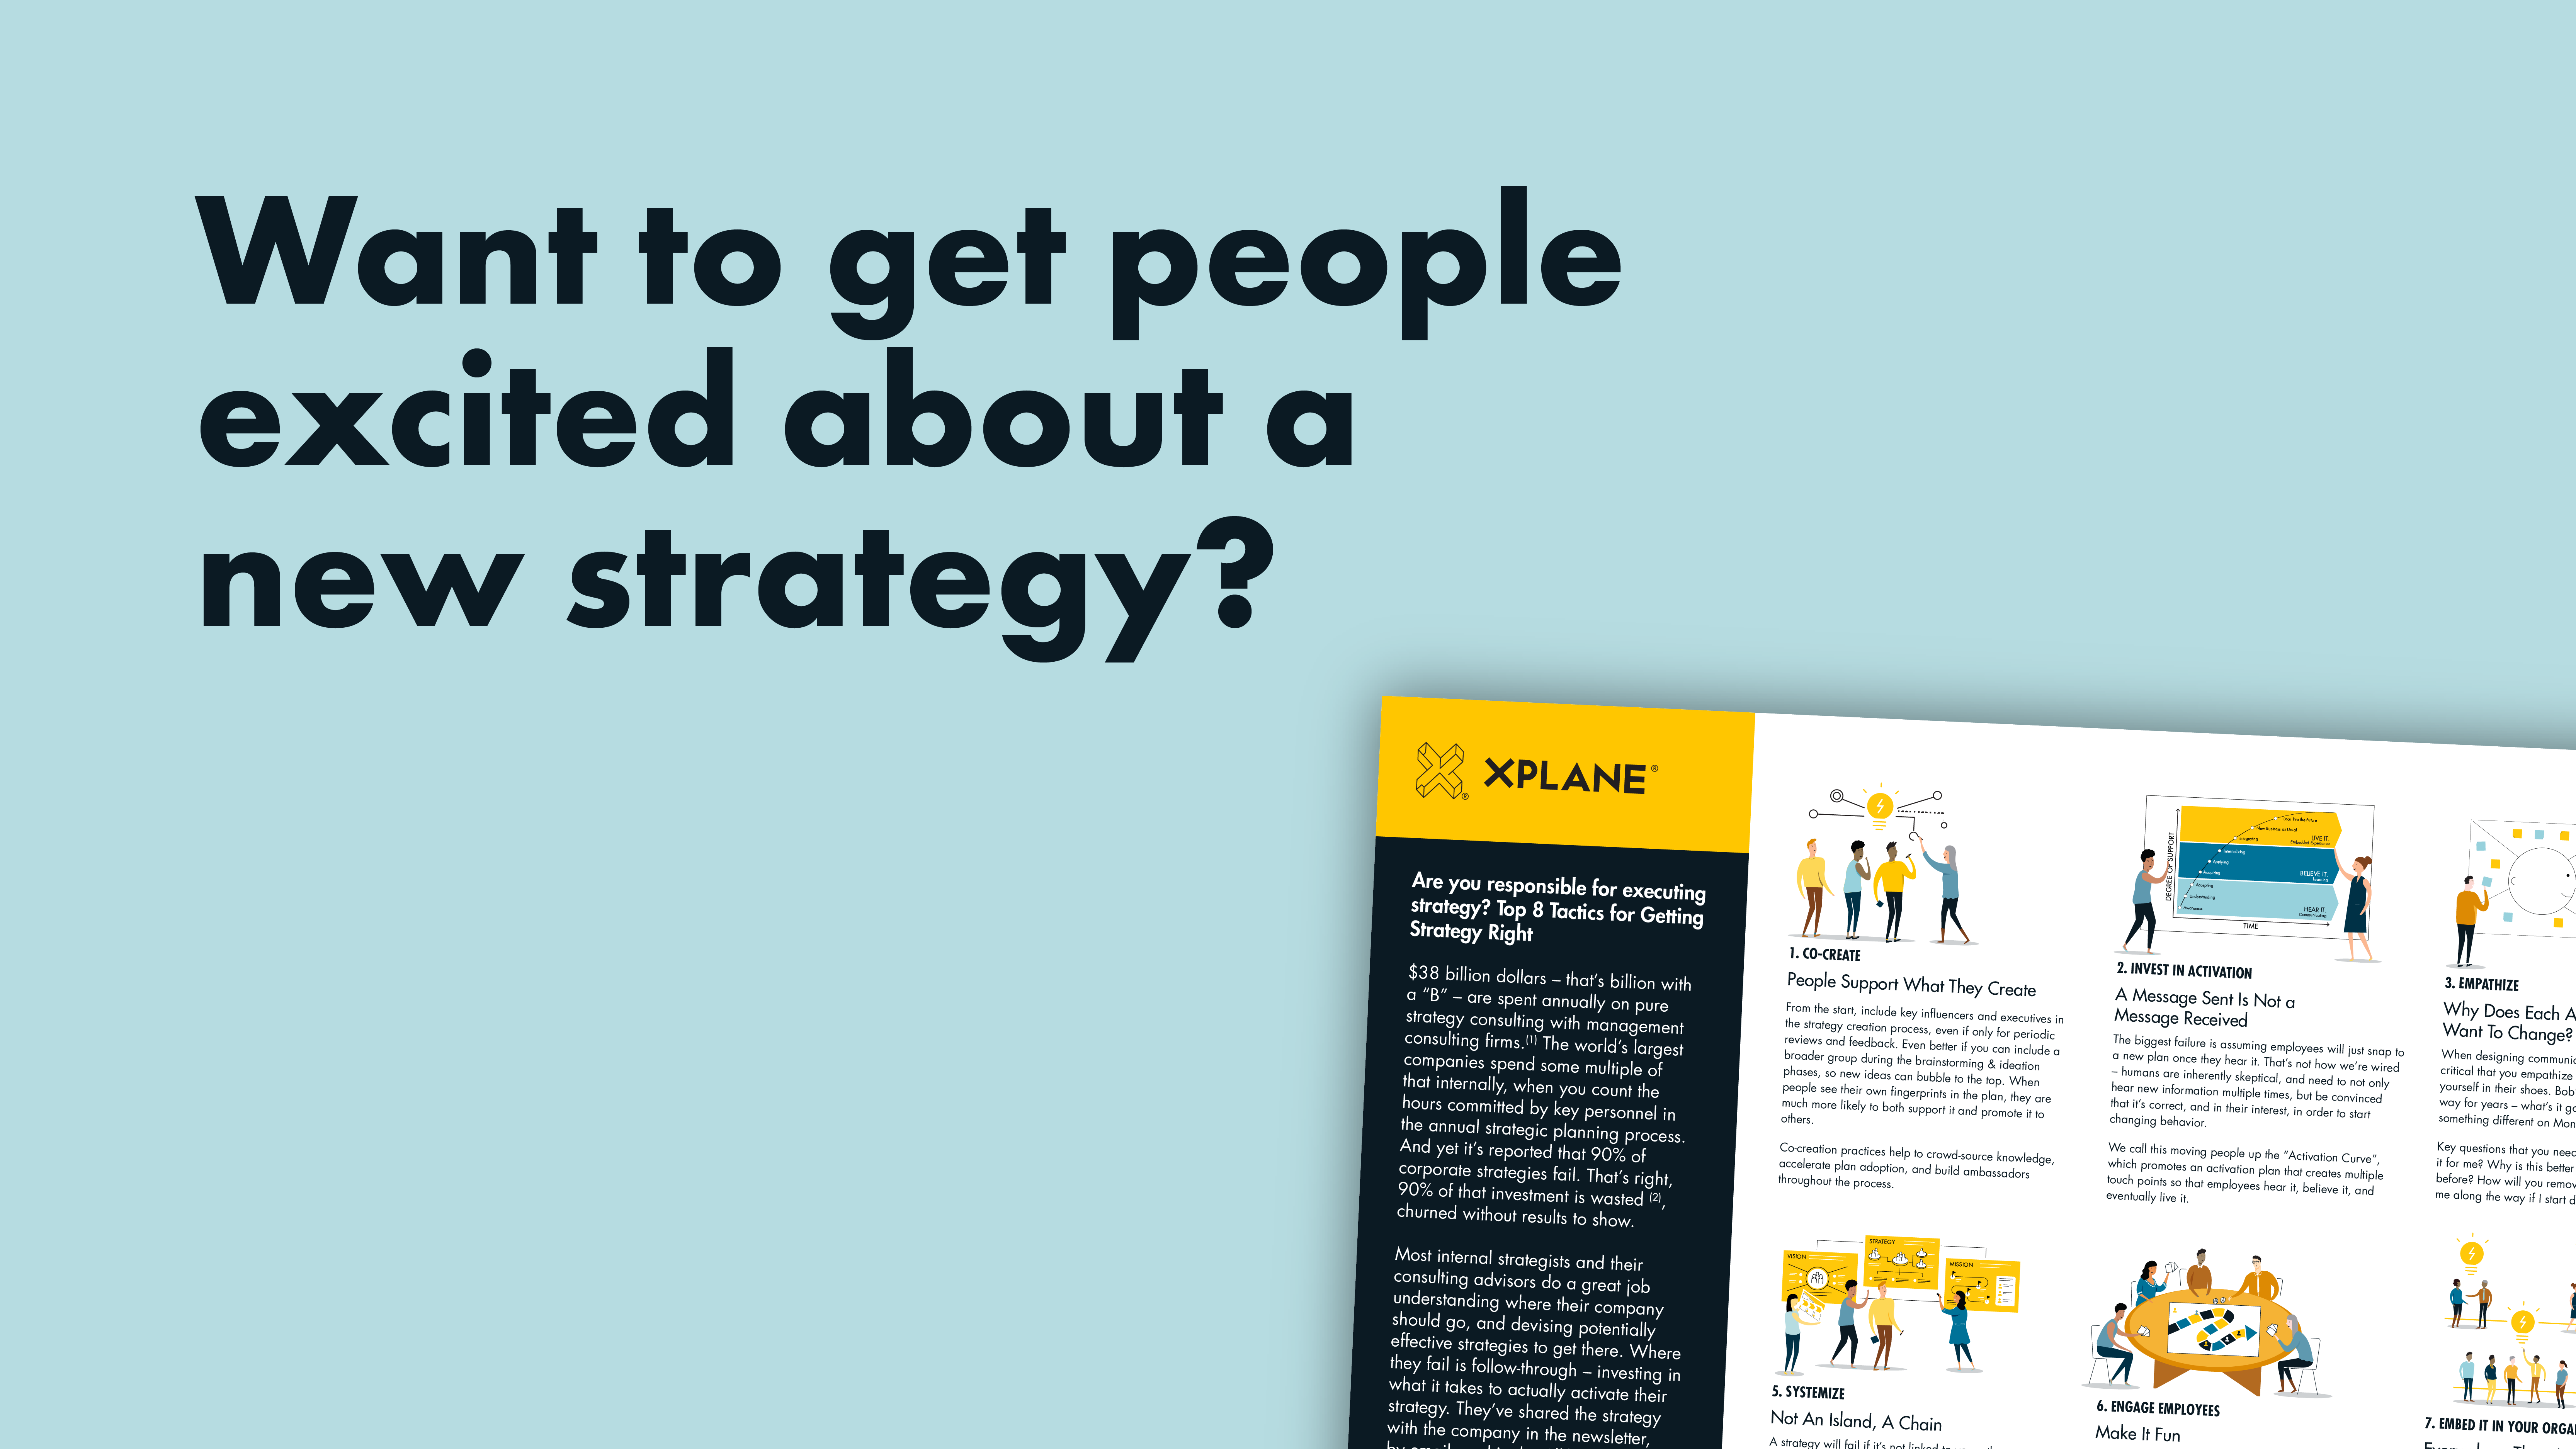 Text reading "Want to get people excited about a new strategy?" This is besides the guide available for download.